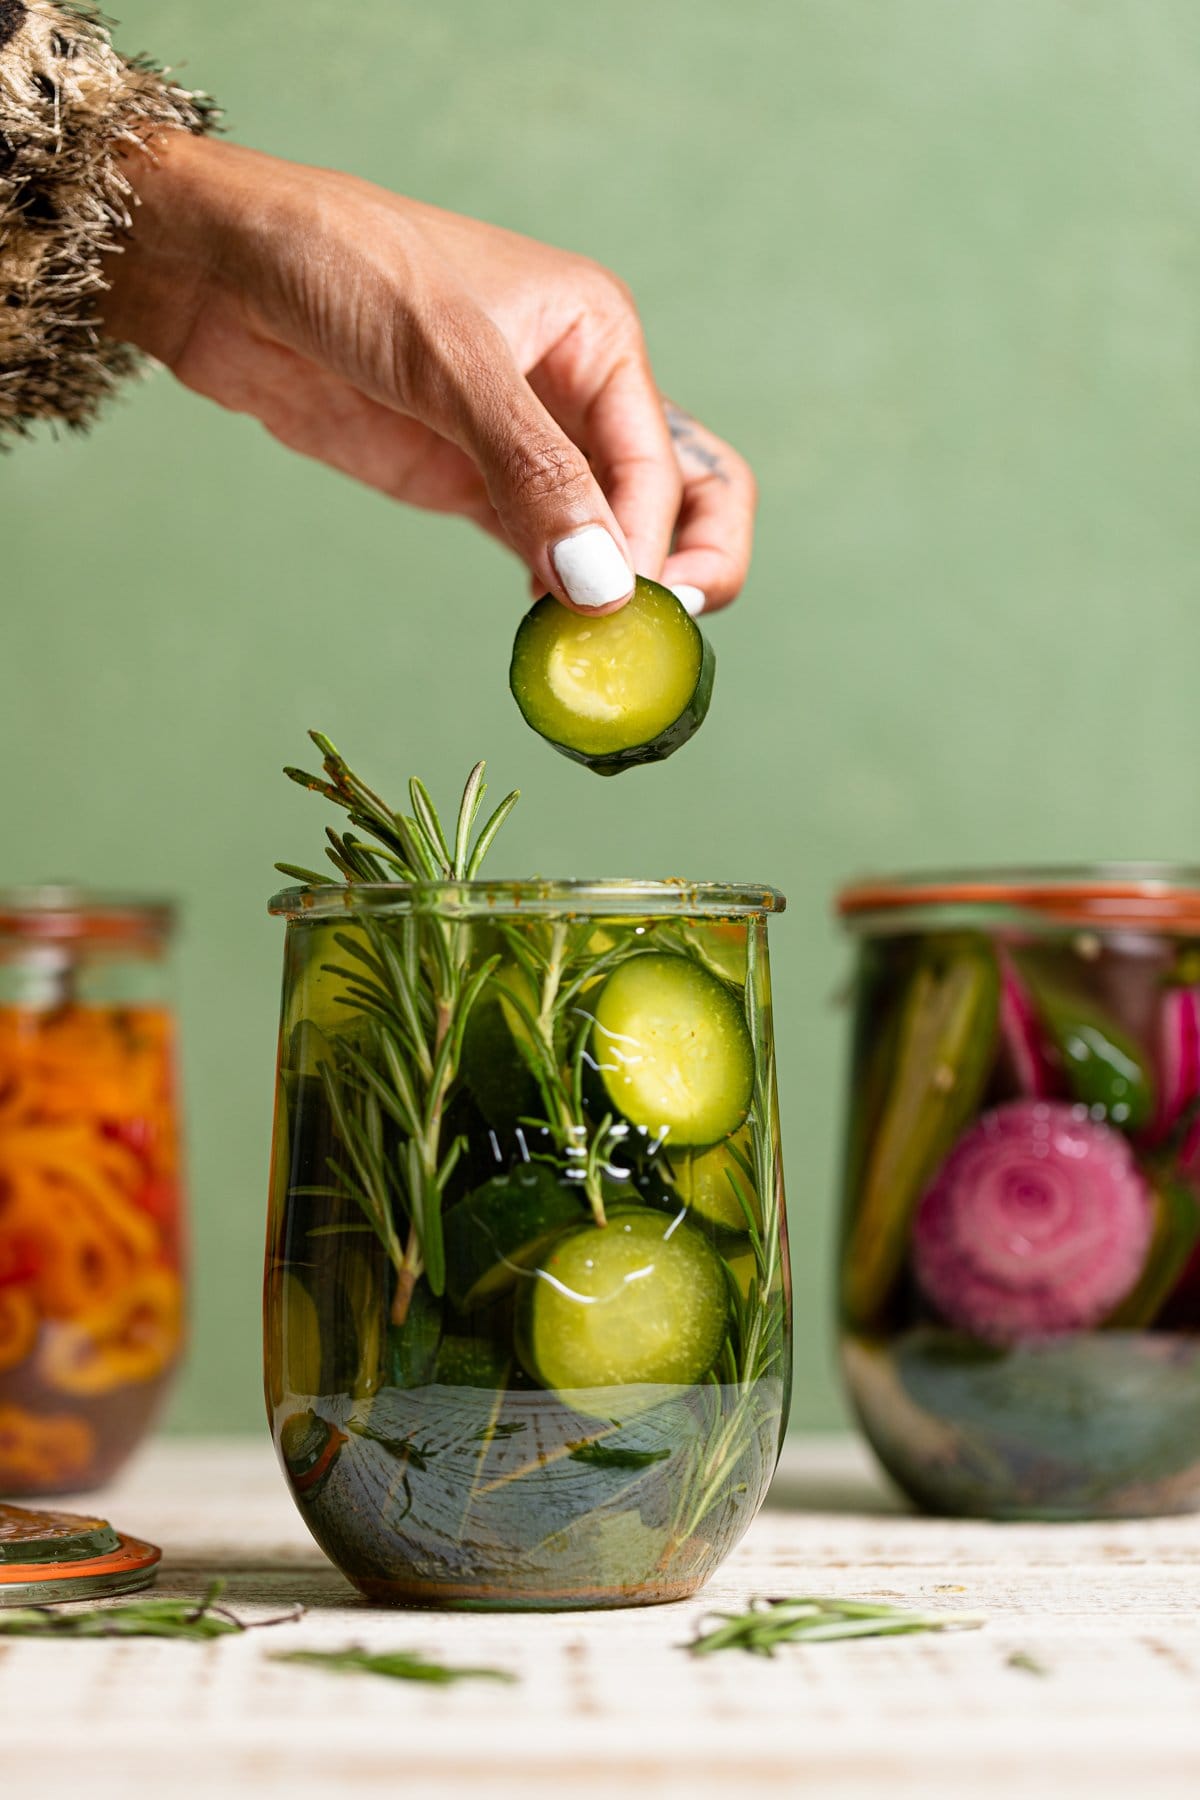 How to Make Quick Pickled Vegetables